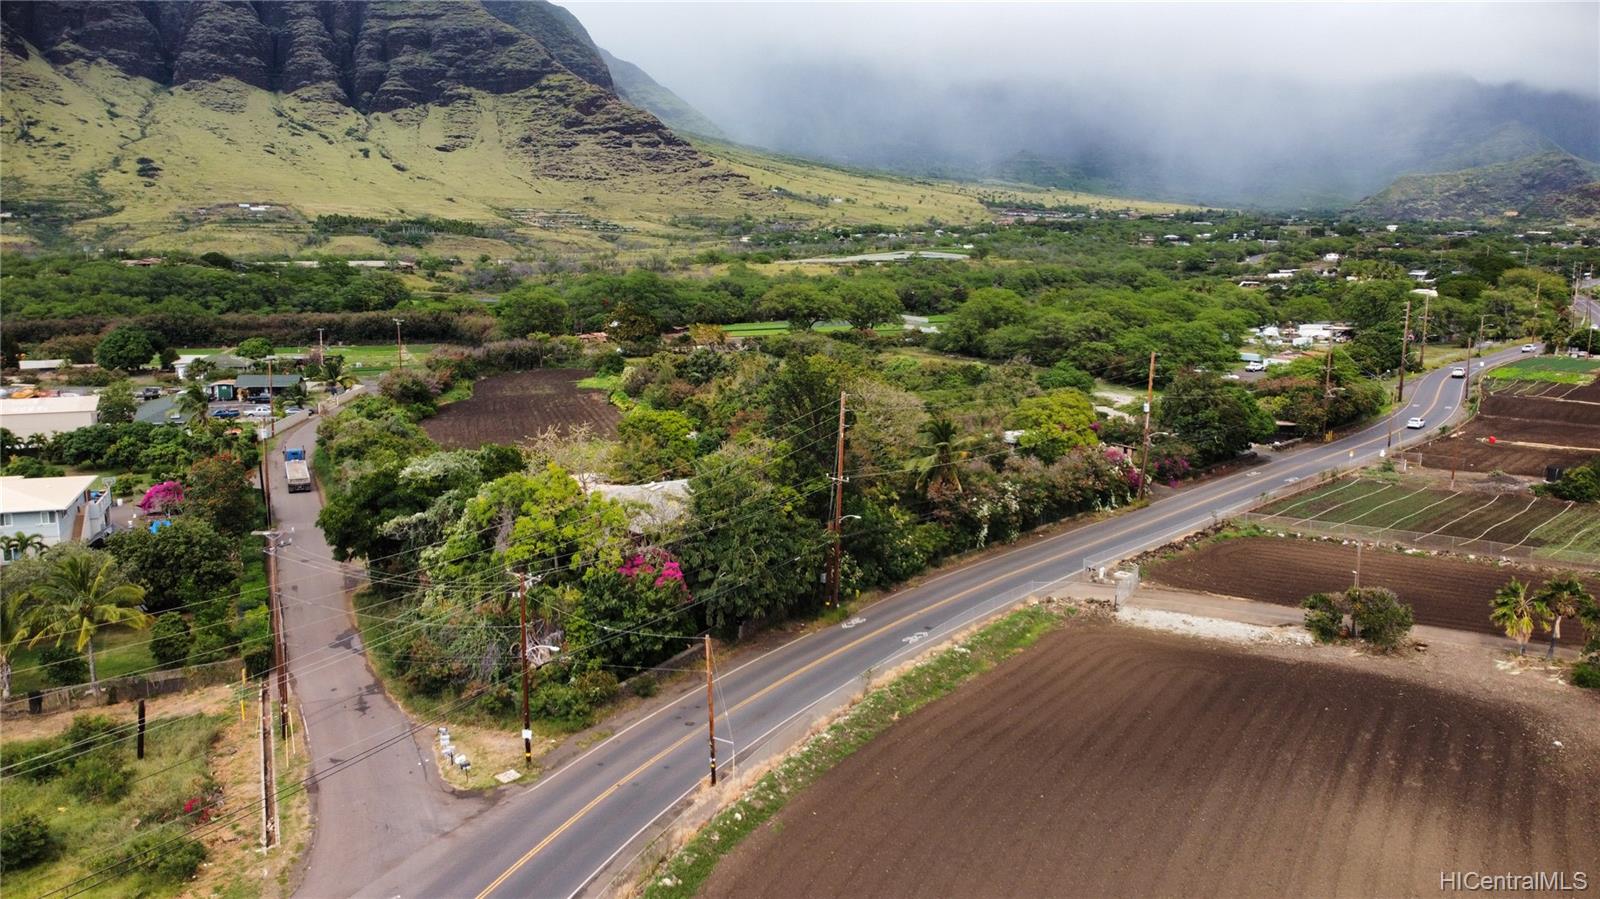 85-561 Waianae Valley Road